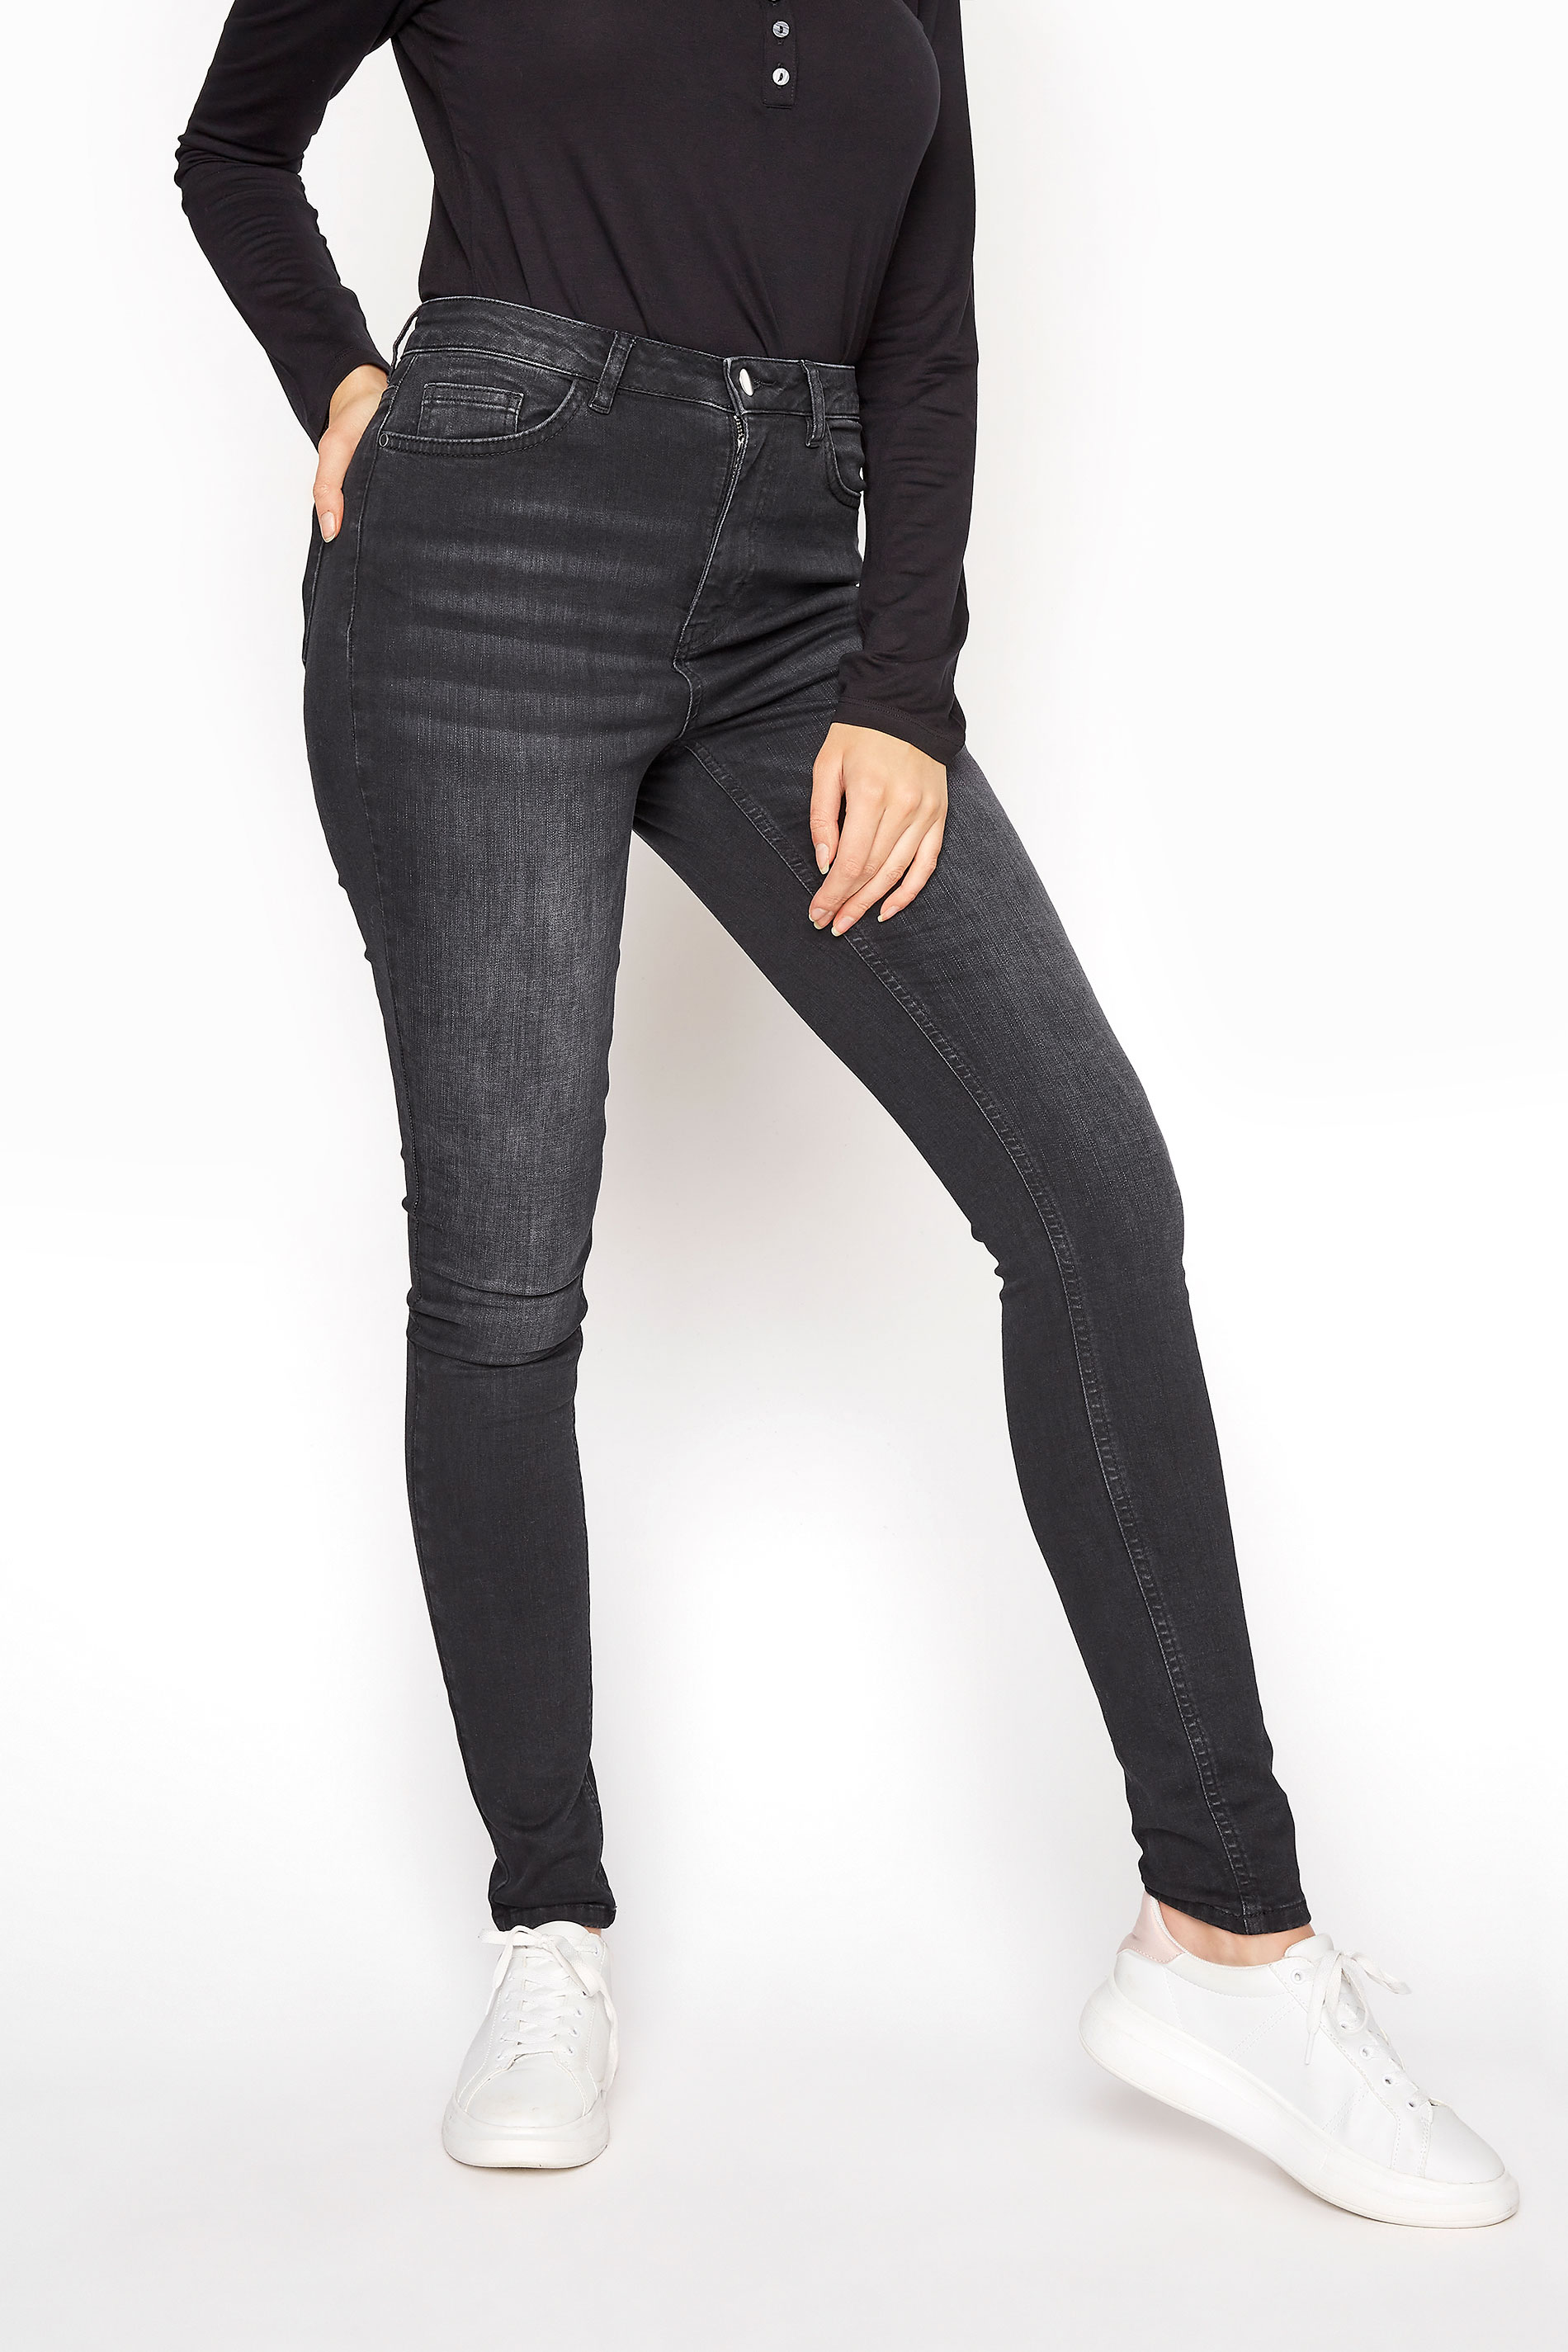 Washed Black Ultra Stretch Skinny Jeans | Long Tall Sally